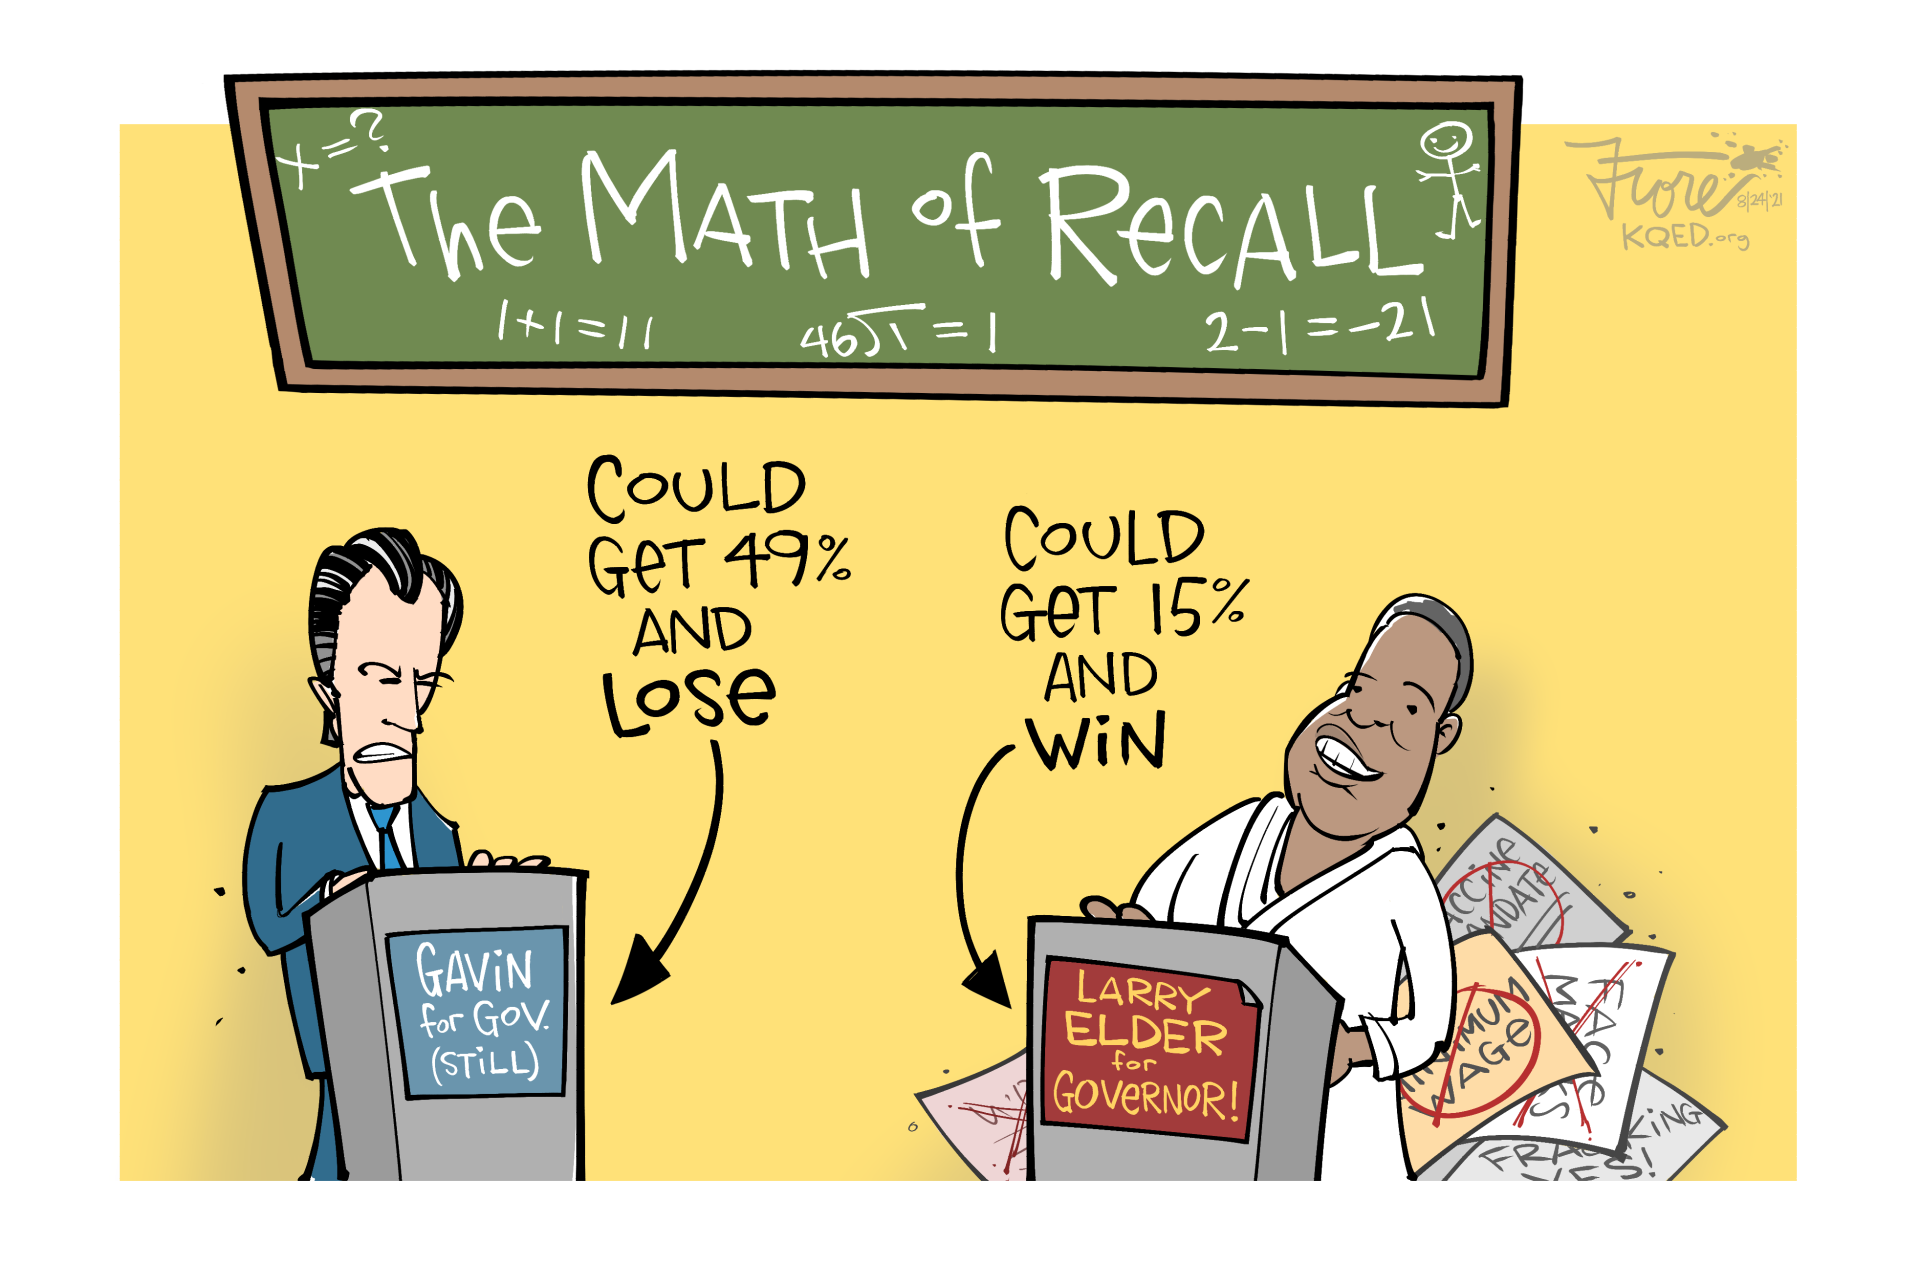 A Mark Fiore cartoon titled, "The Math of Recall," that shows Gavin Newsom and Larry Elder. One label points at Newsom that says, "could get 49% and lose." The label pointing to Larry Elder reads, "could get 15% and win."